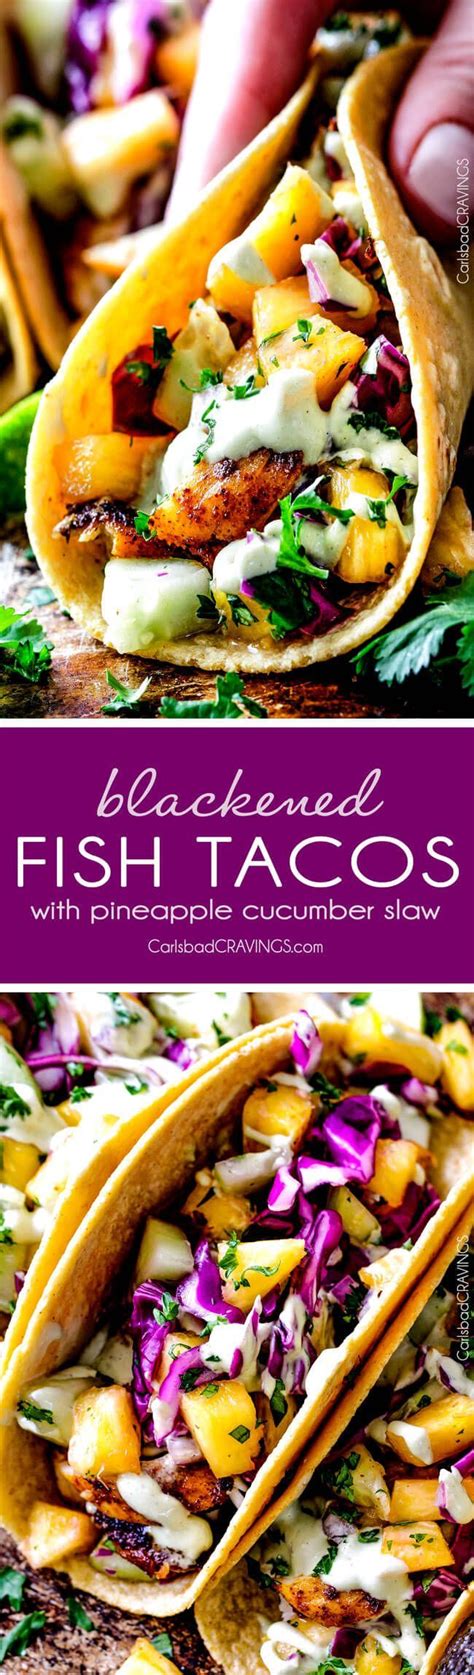 fish tacos with pineapple slaw and cilantro sauce